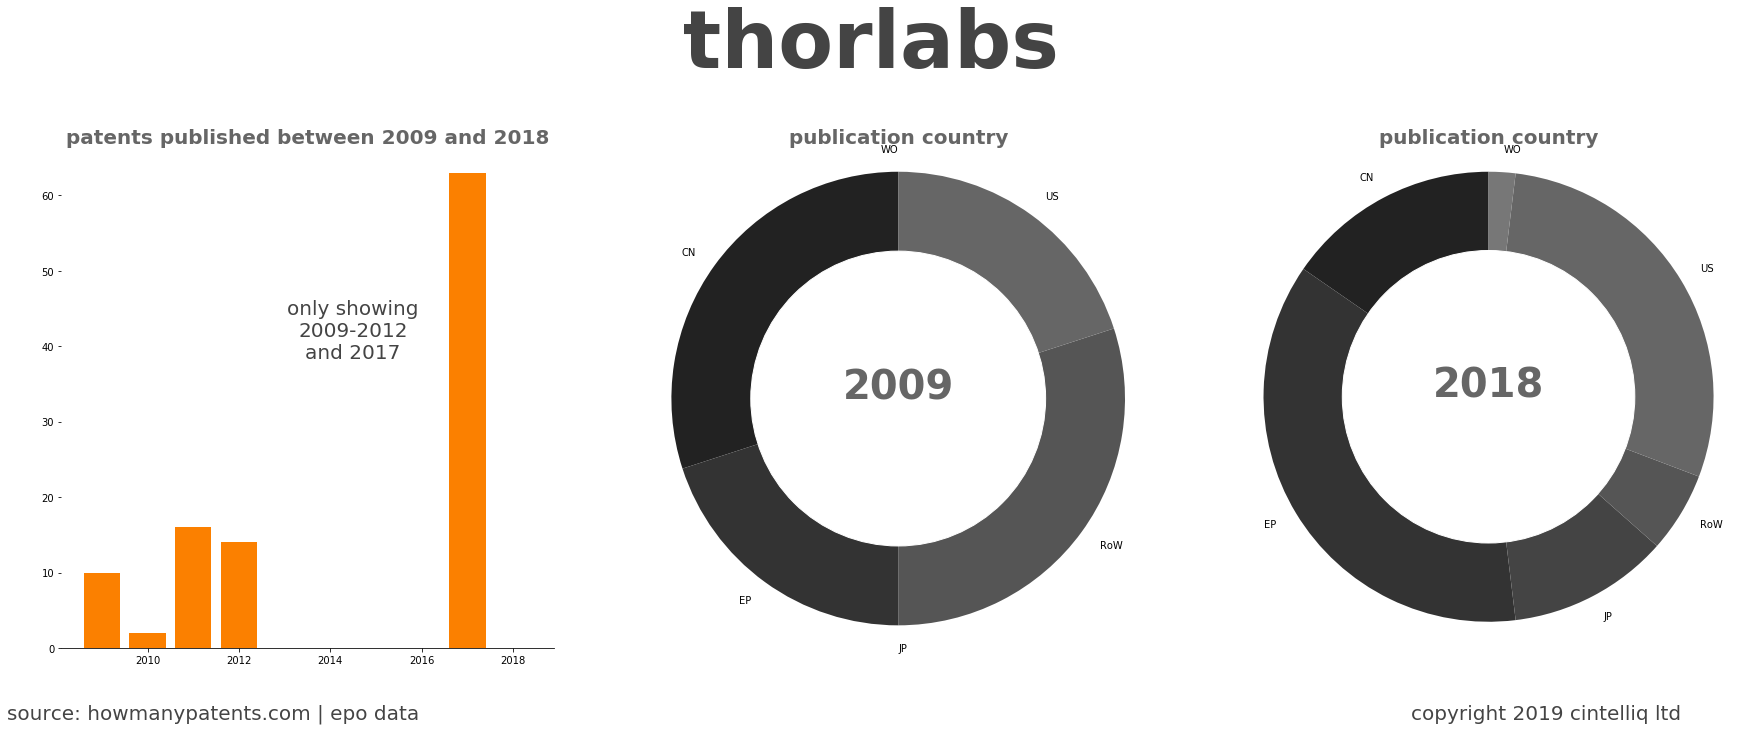 summary of patents for Thorlabs